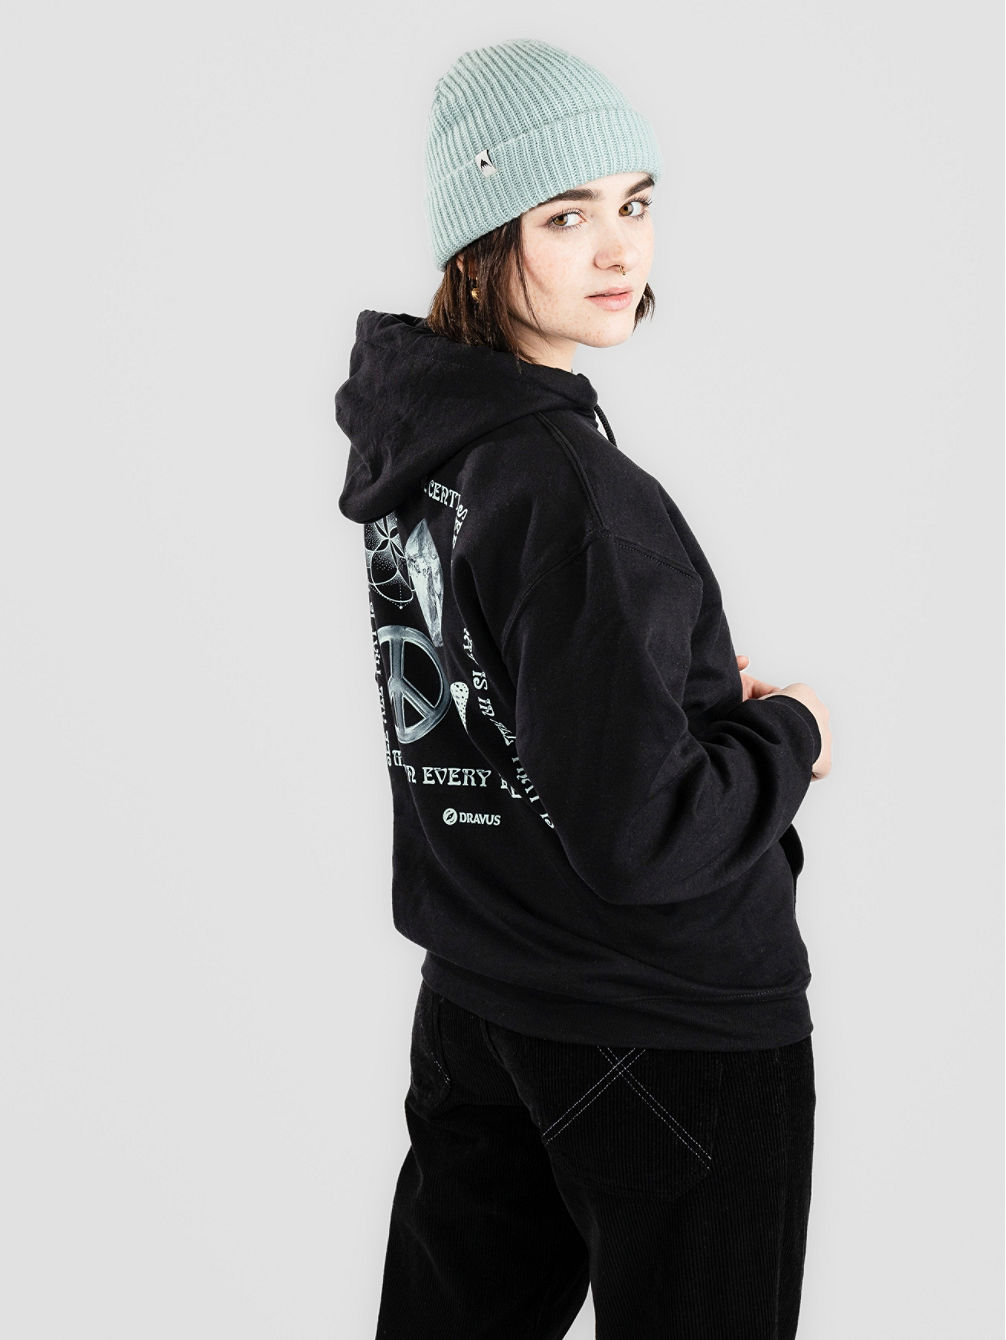 Stay Centered Hoodie